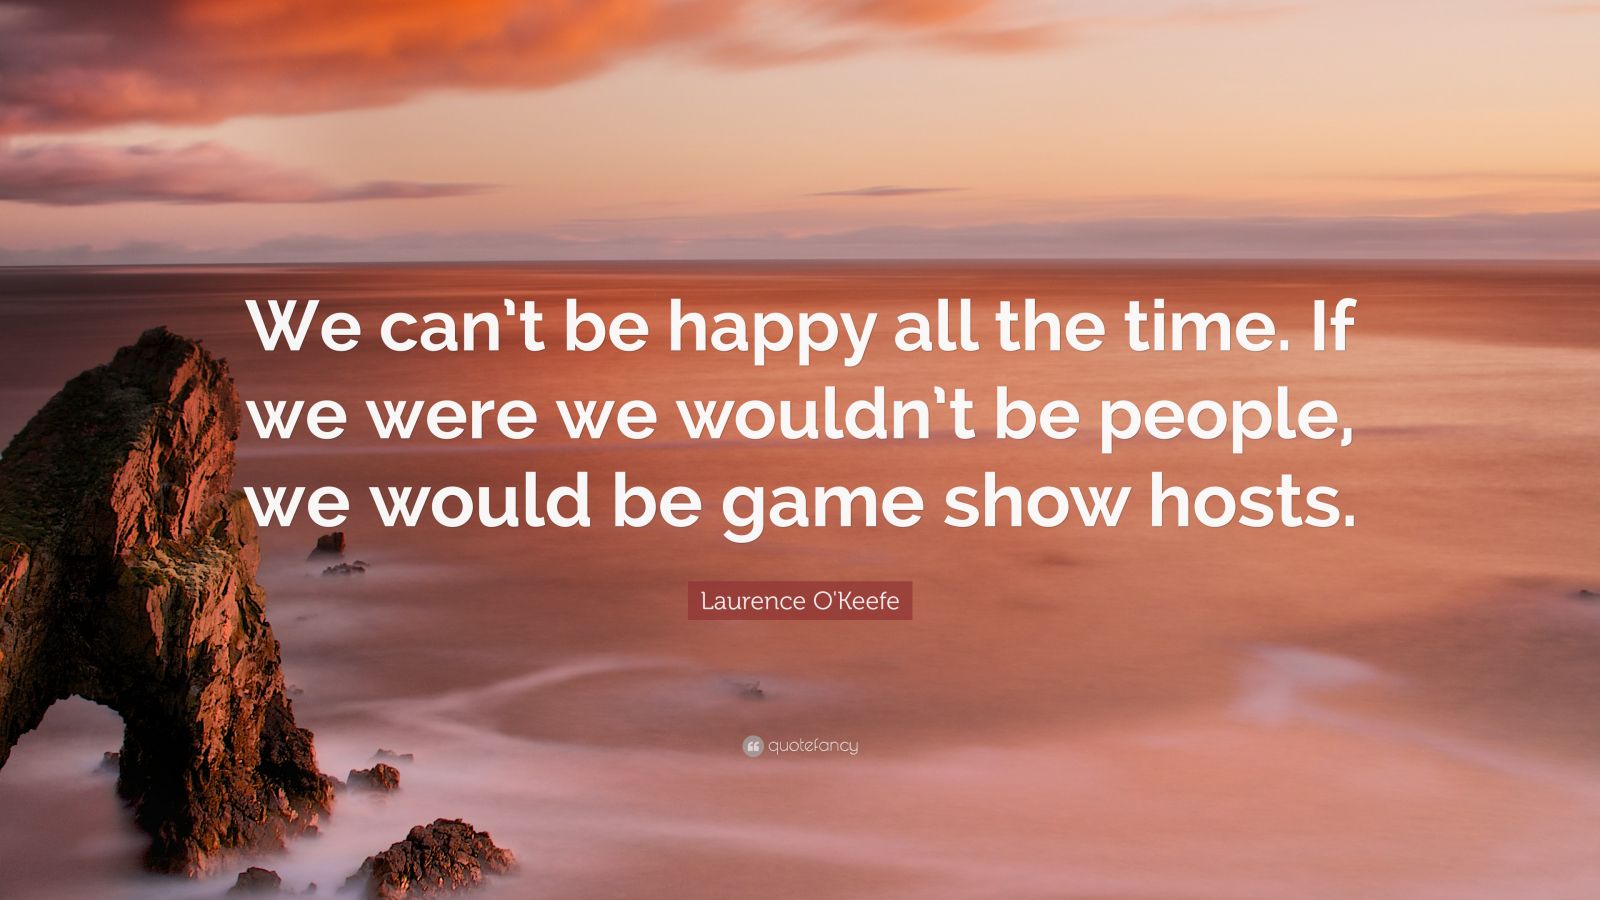 Laurence O'Keefe Quote: “We can't be happy all the time. If we were we  wouldn't be people, we would be game show hosts.”